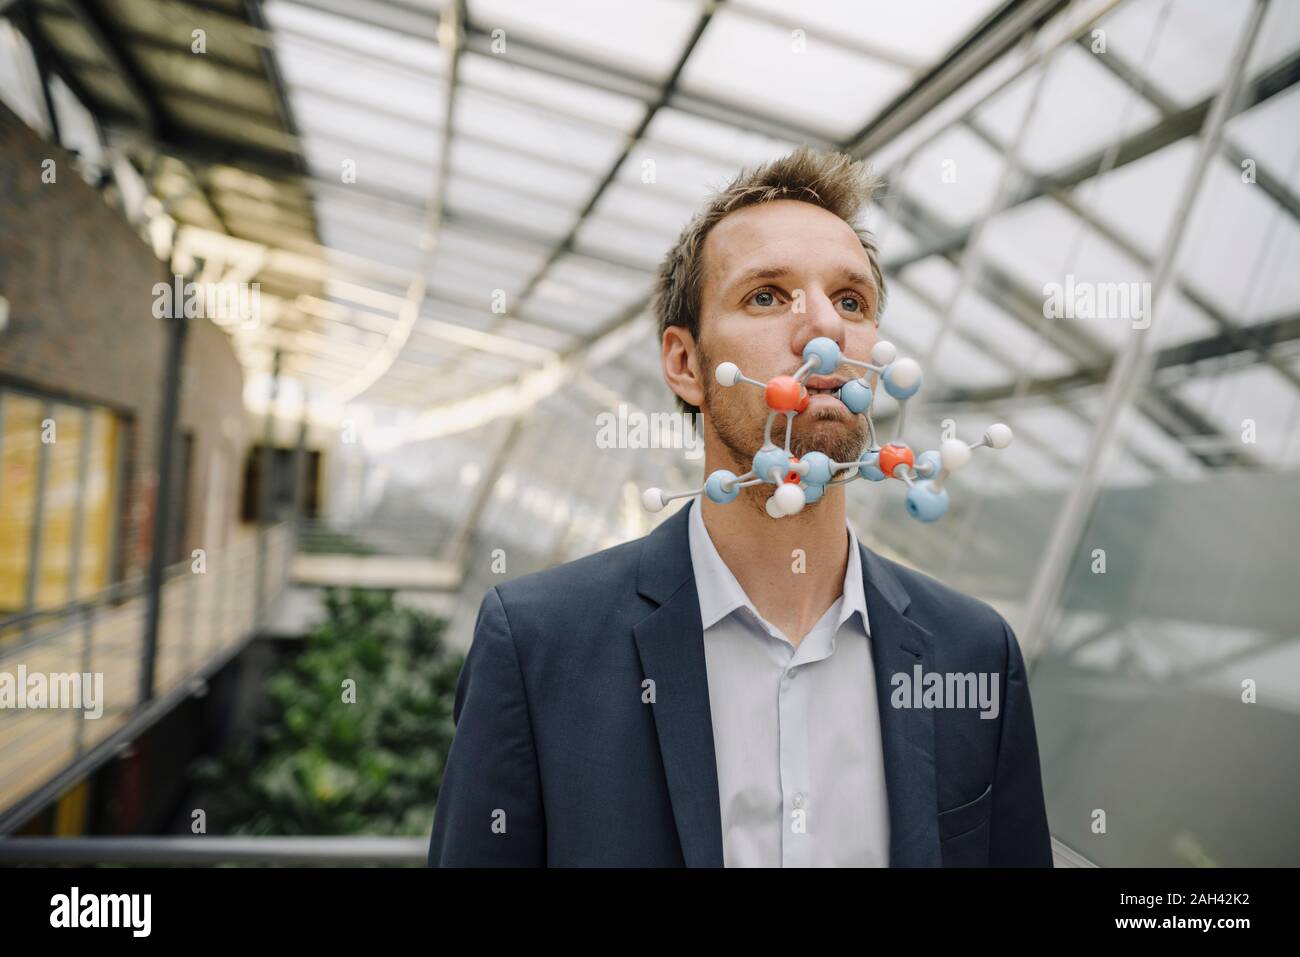 Portrait of businessman with atomic modelin his mouth Stock Photo